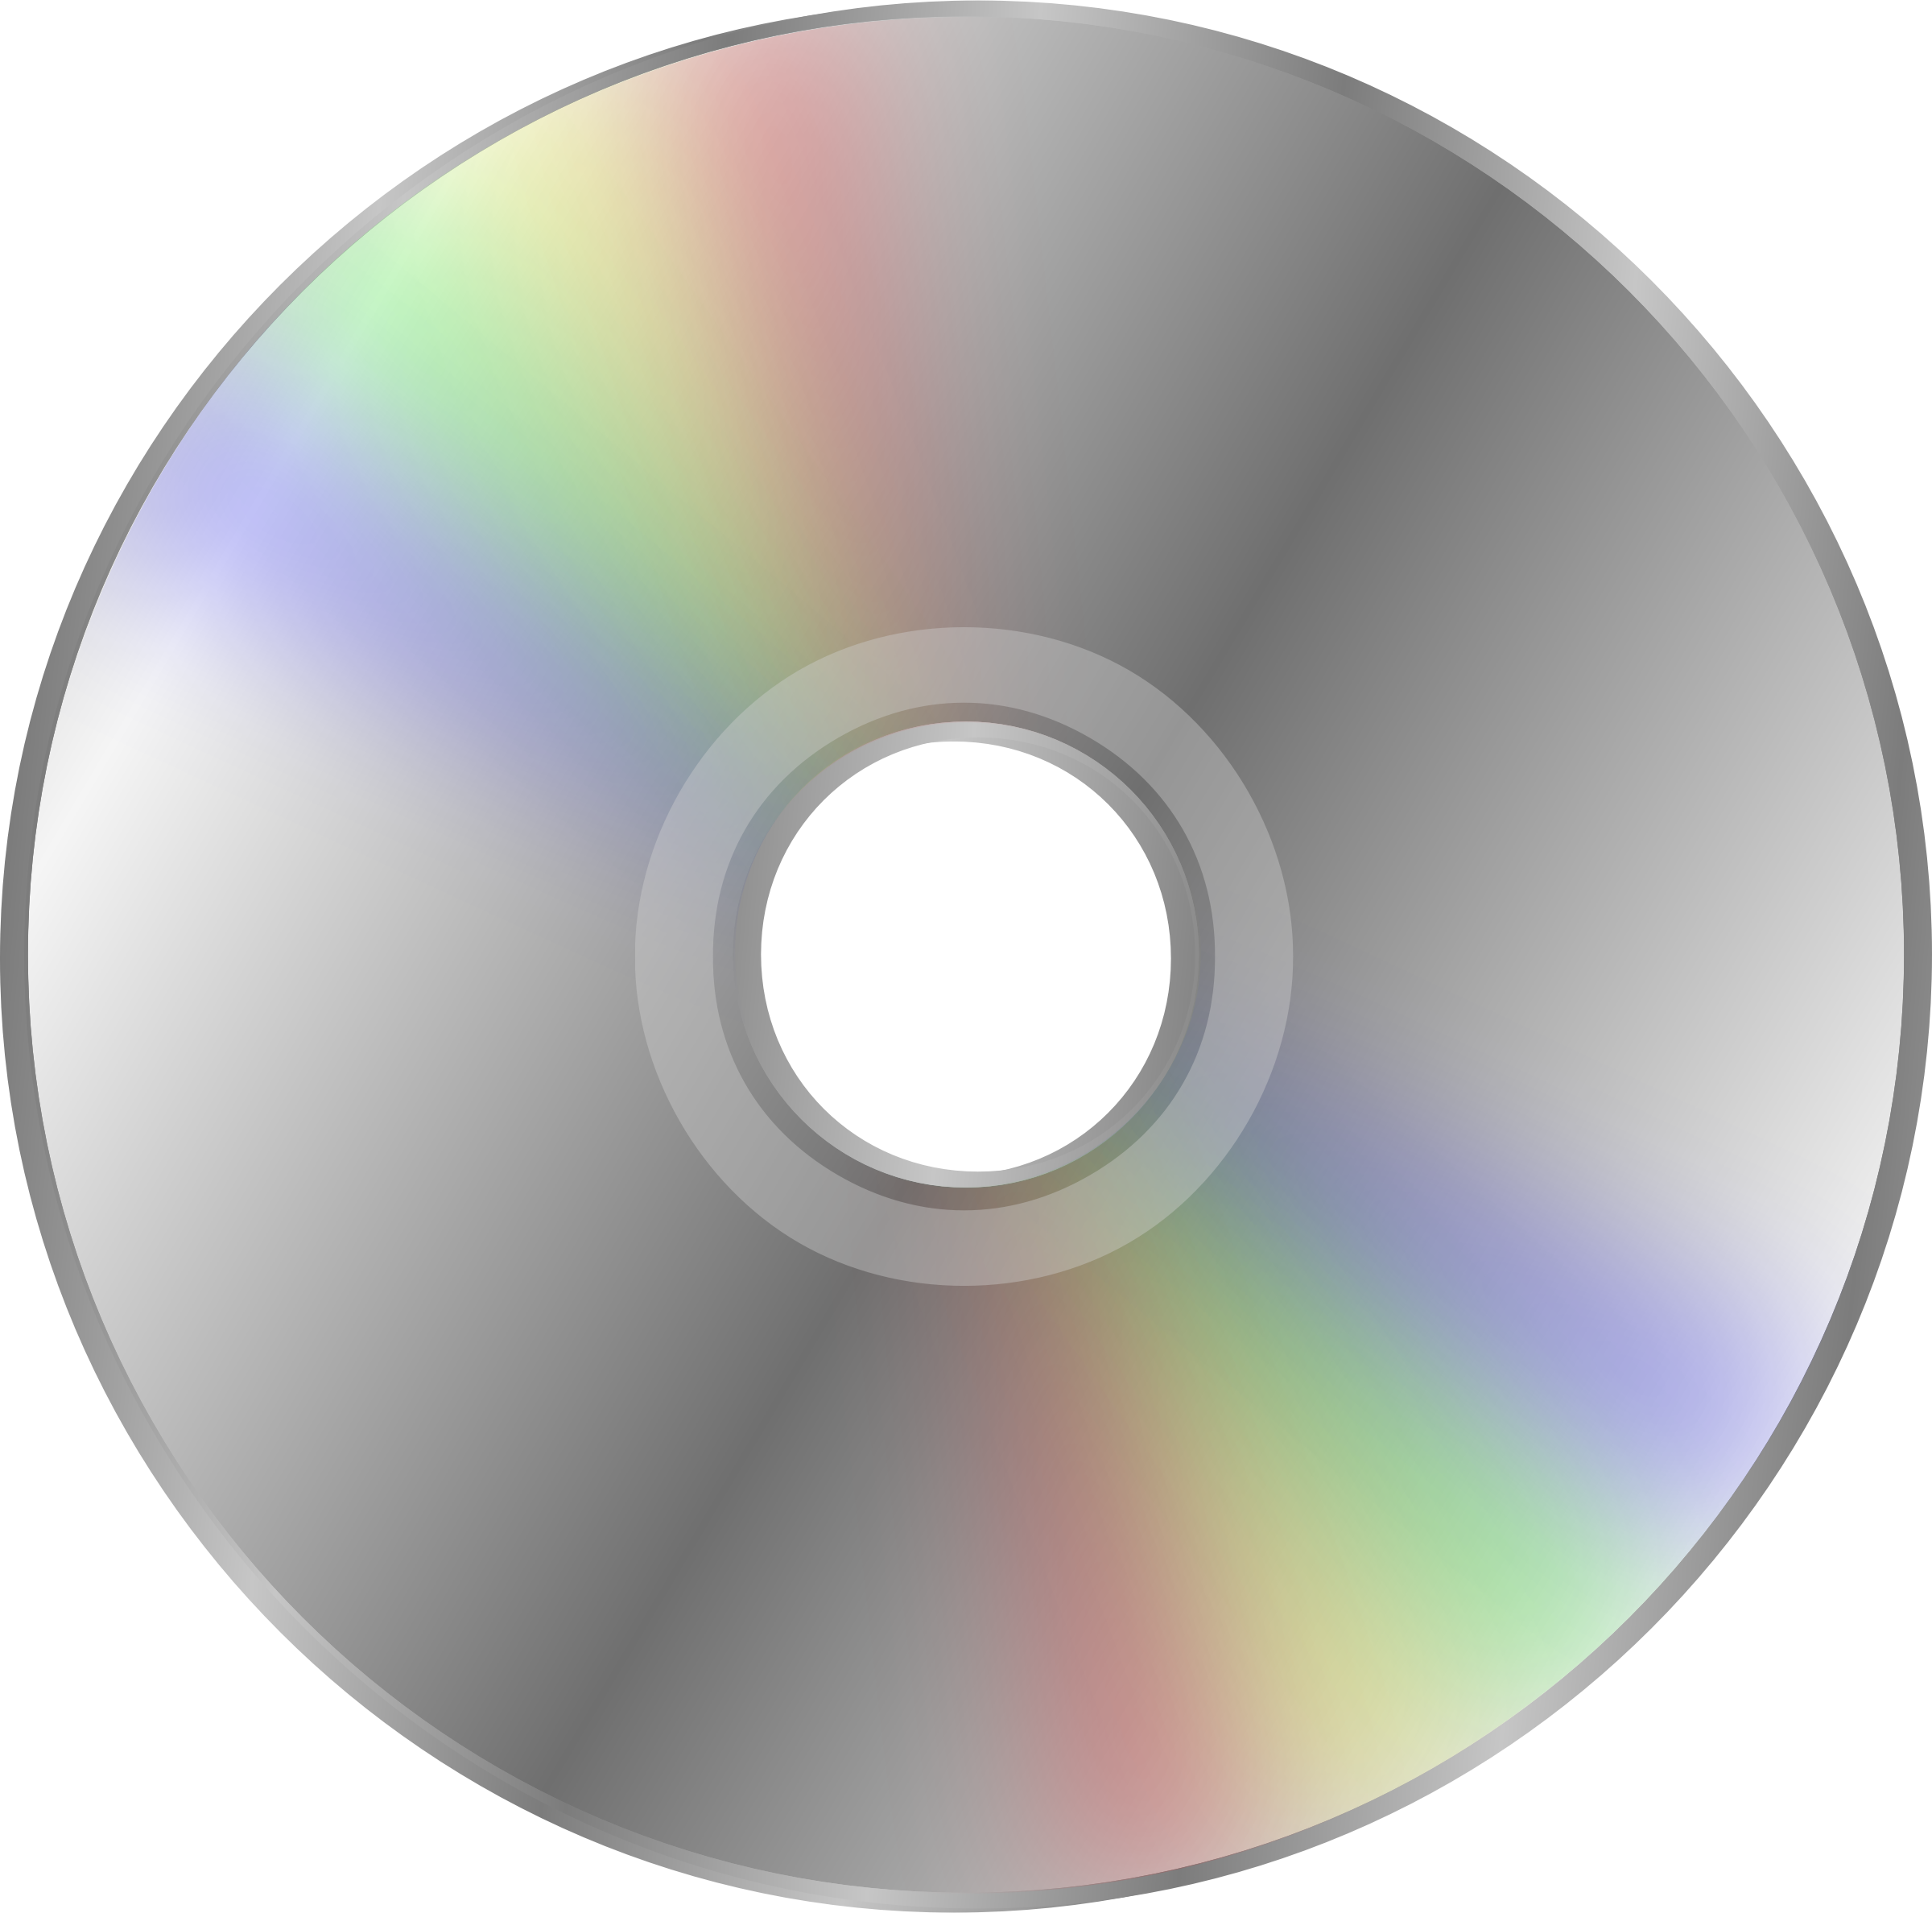 CD/DVD PNG images free download, CD png, DVD png.